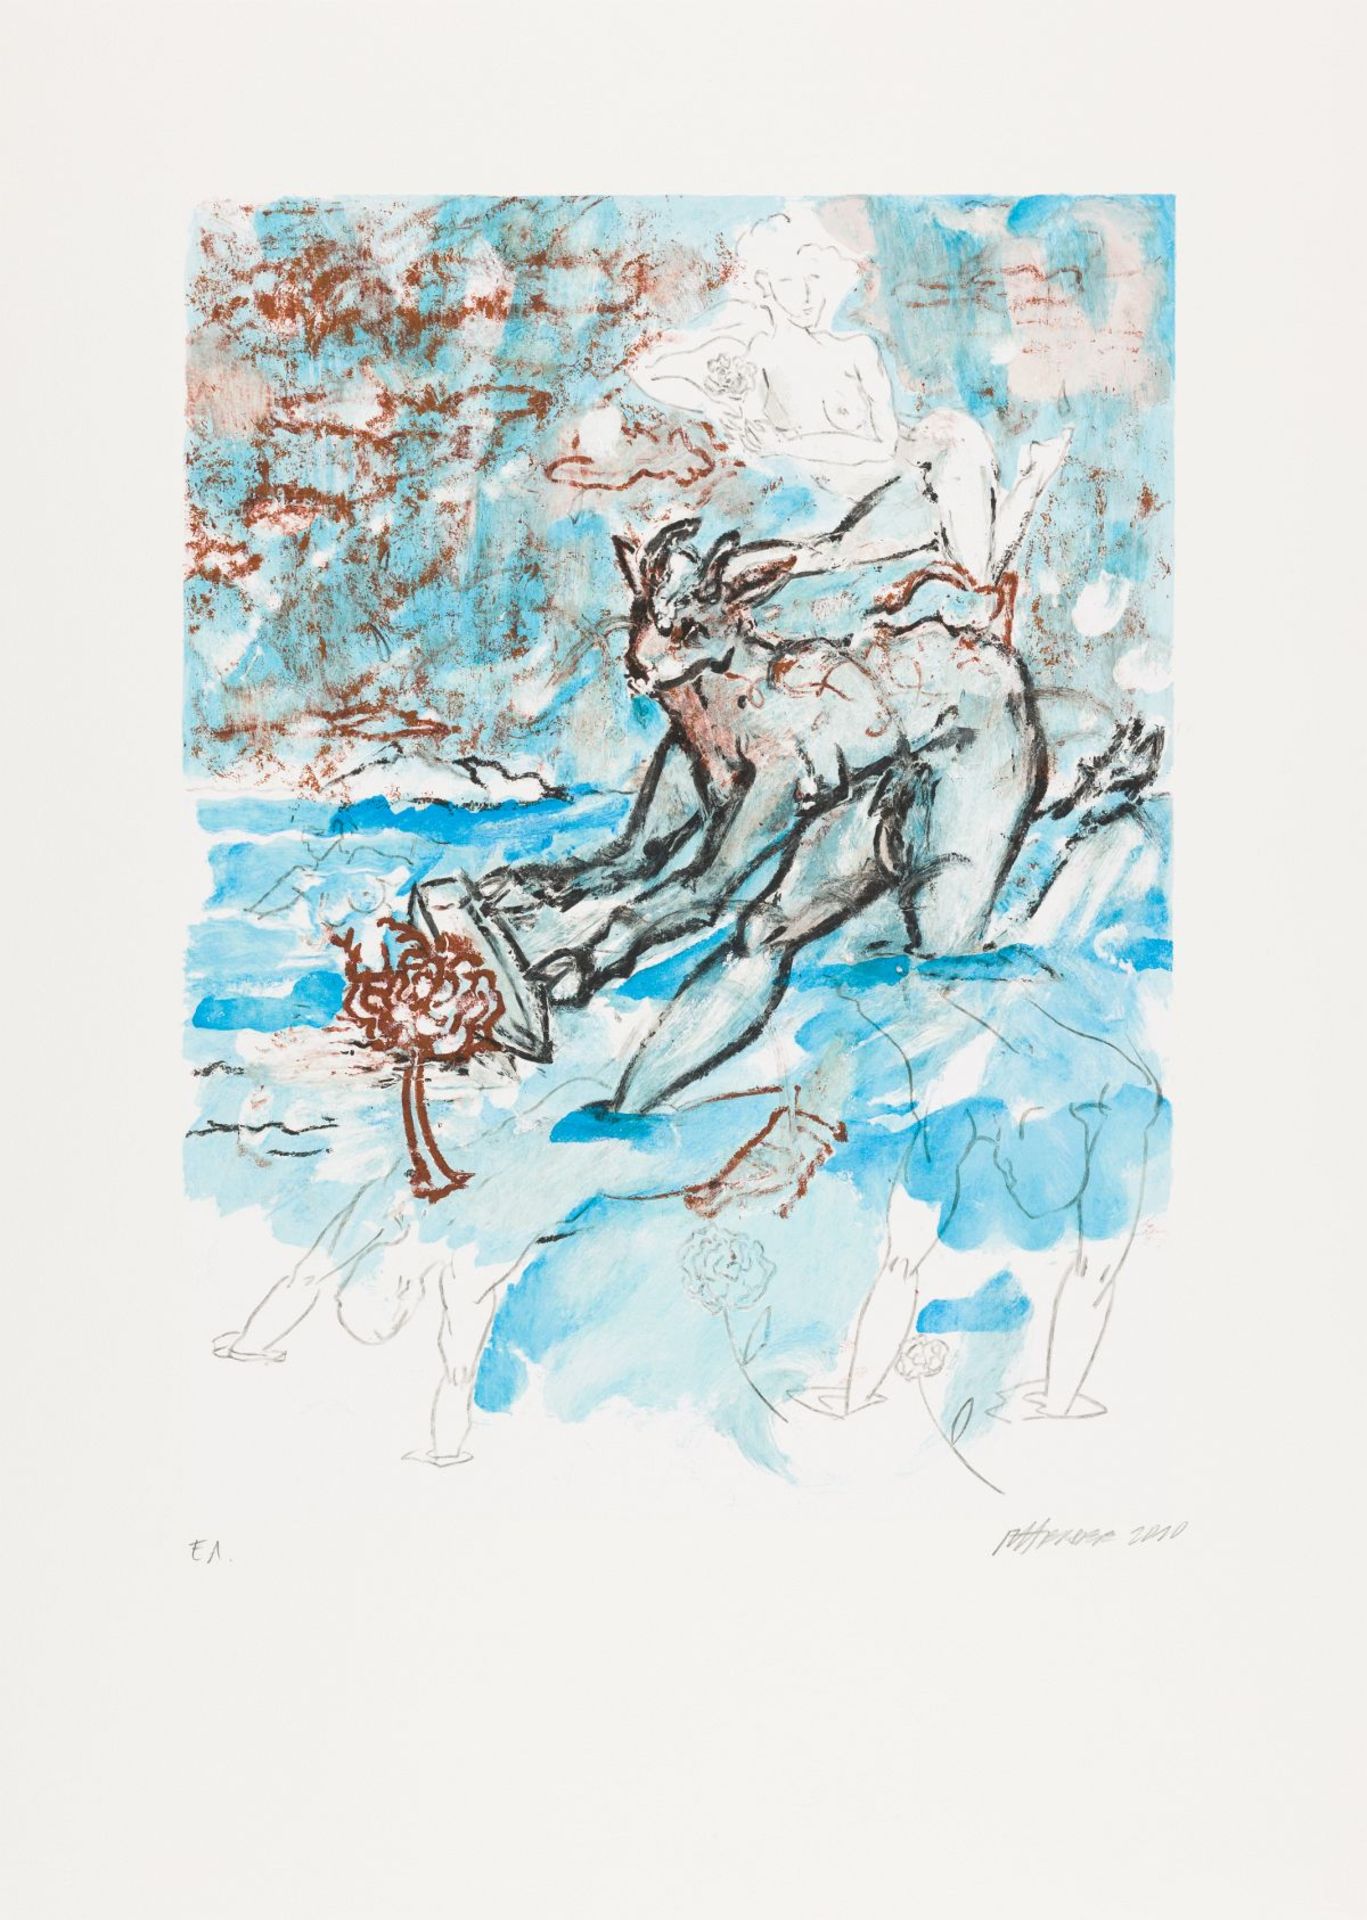 Attersee, Christian Ludwig(*1940)Europa reist wieder, 2010colour lithographsigned and dated lower - Image 2 of 4